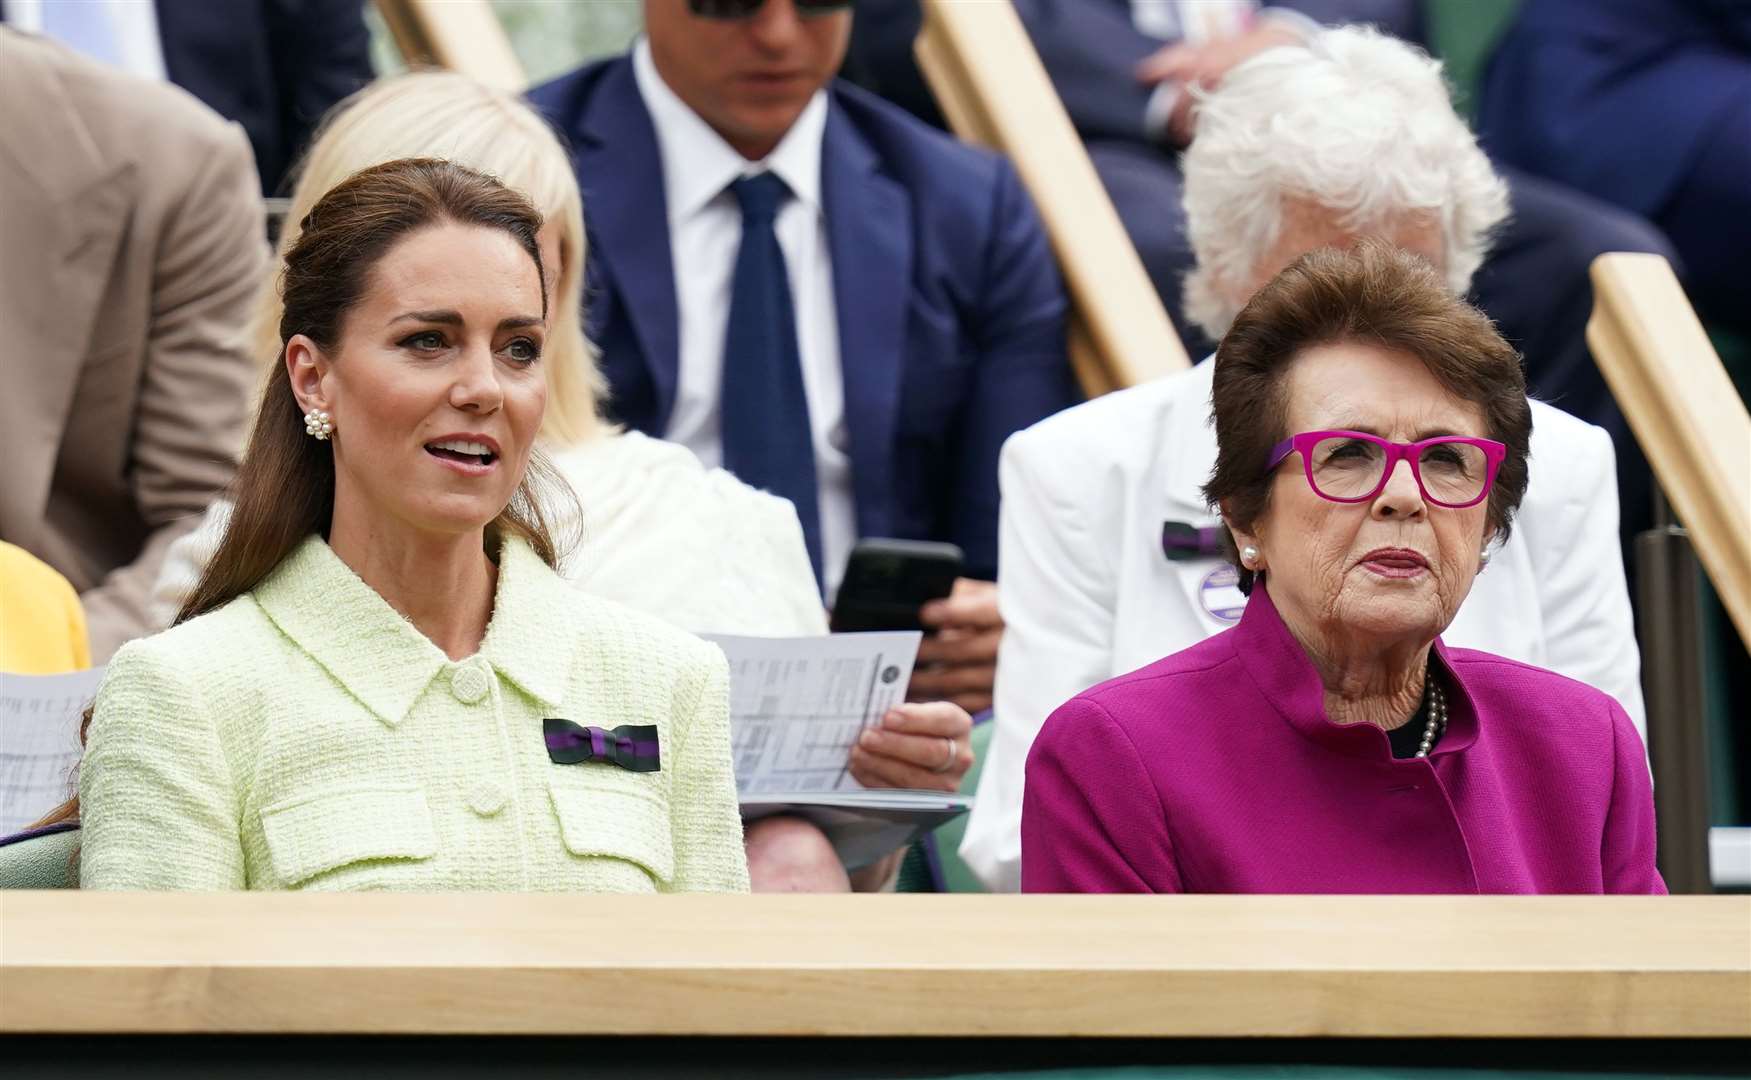 The Princess of Wales and Billie Jean King in the royal box on Saturday (PA)